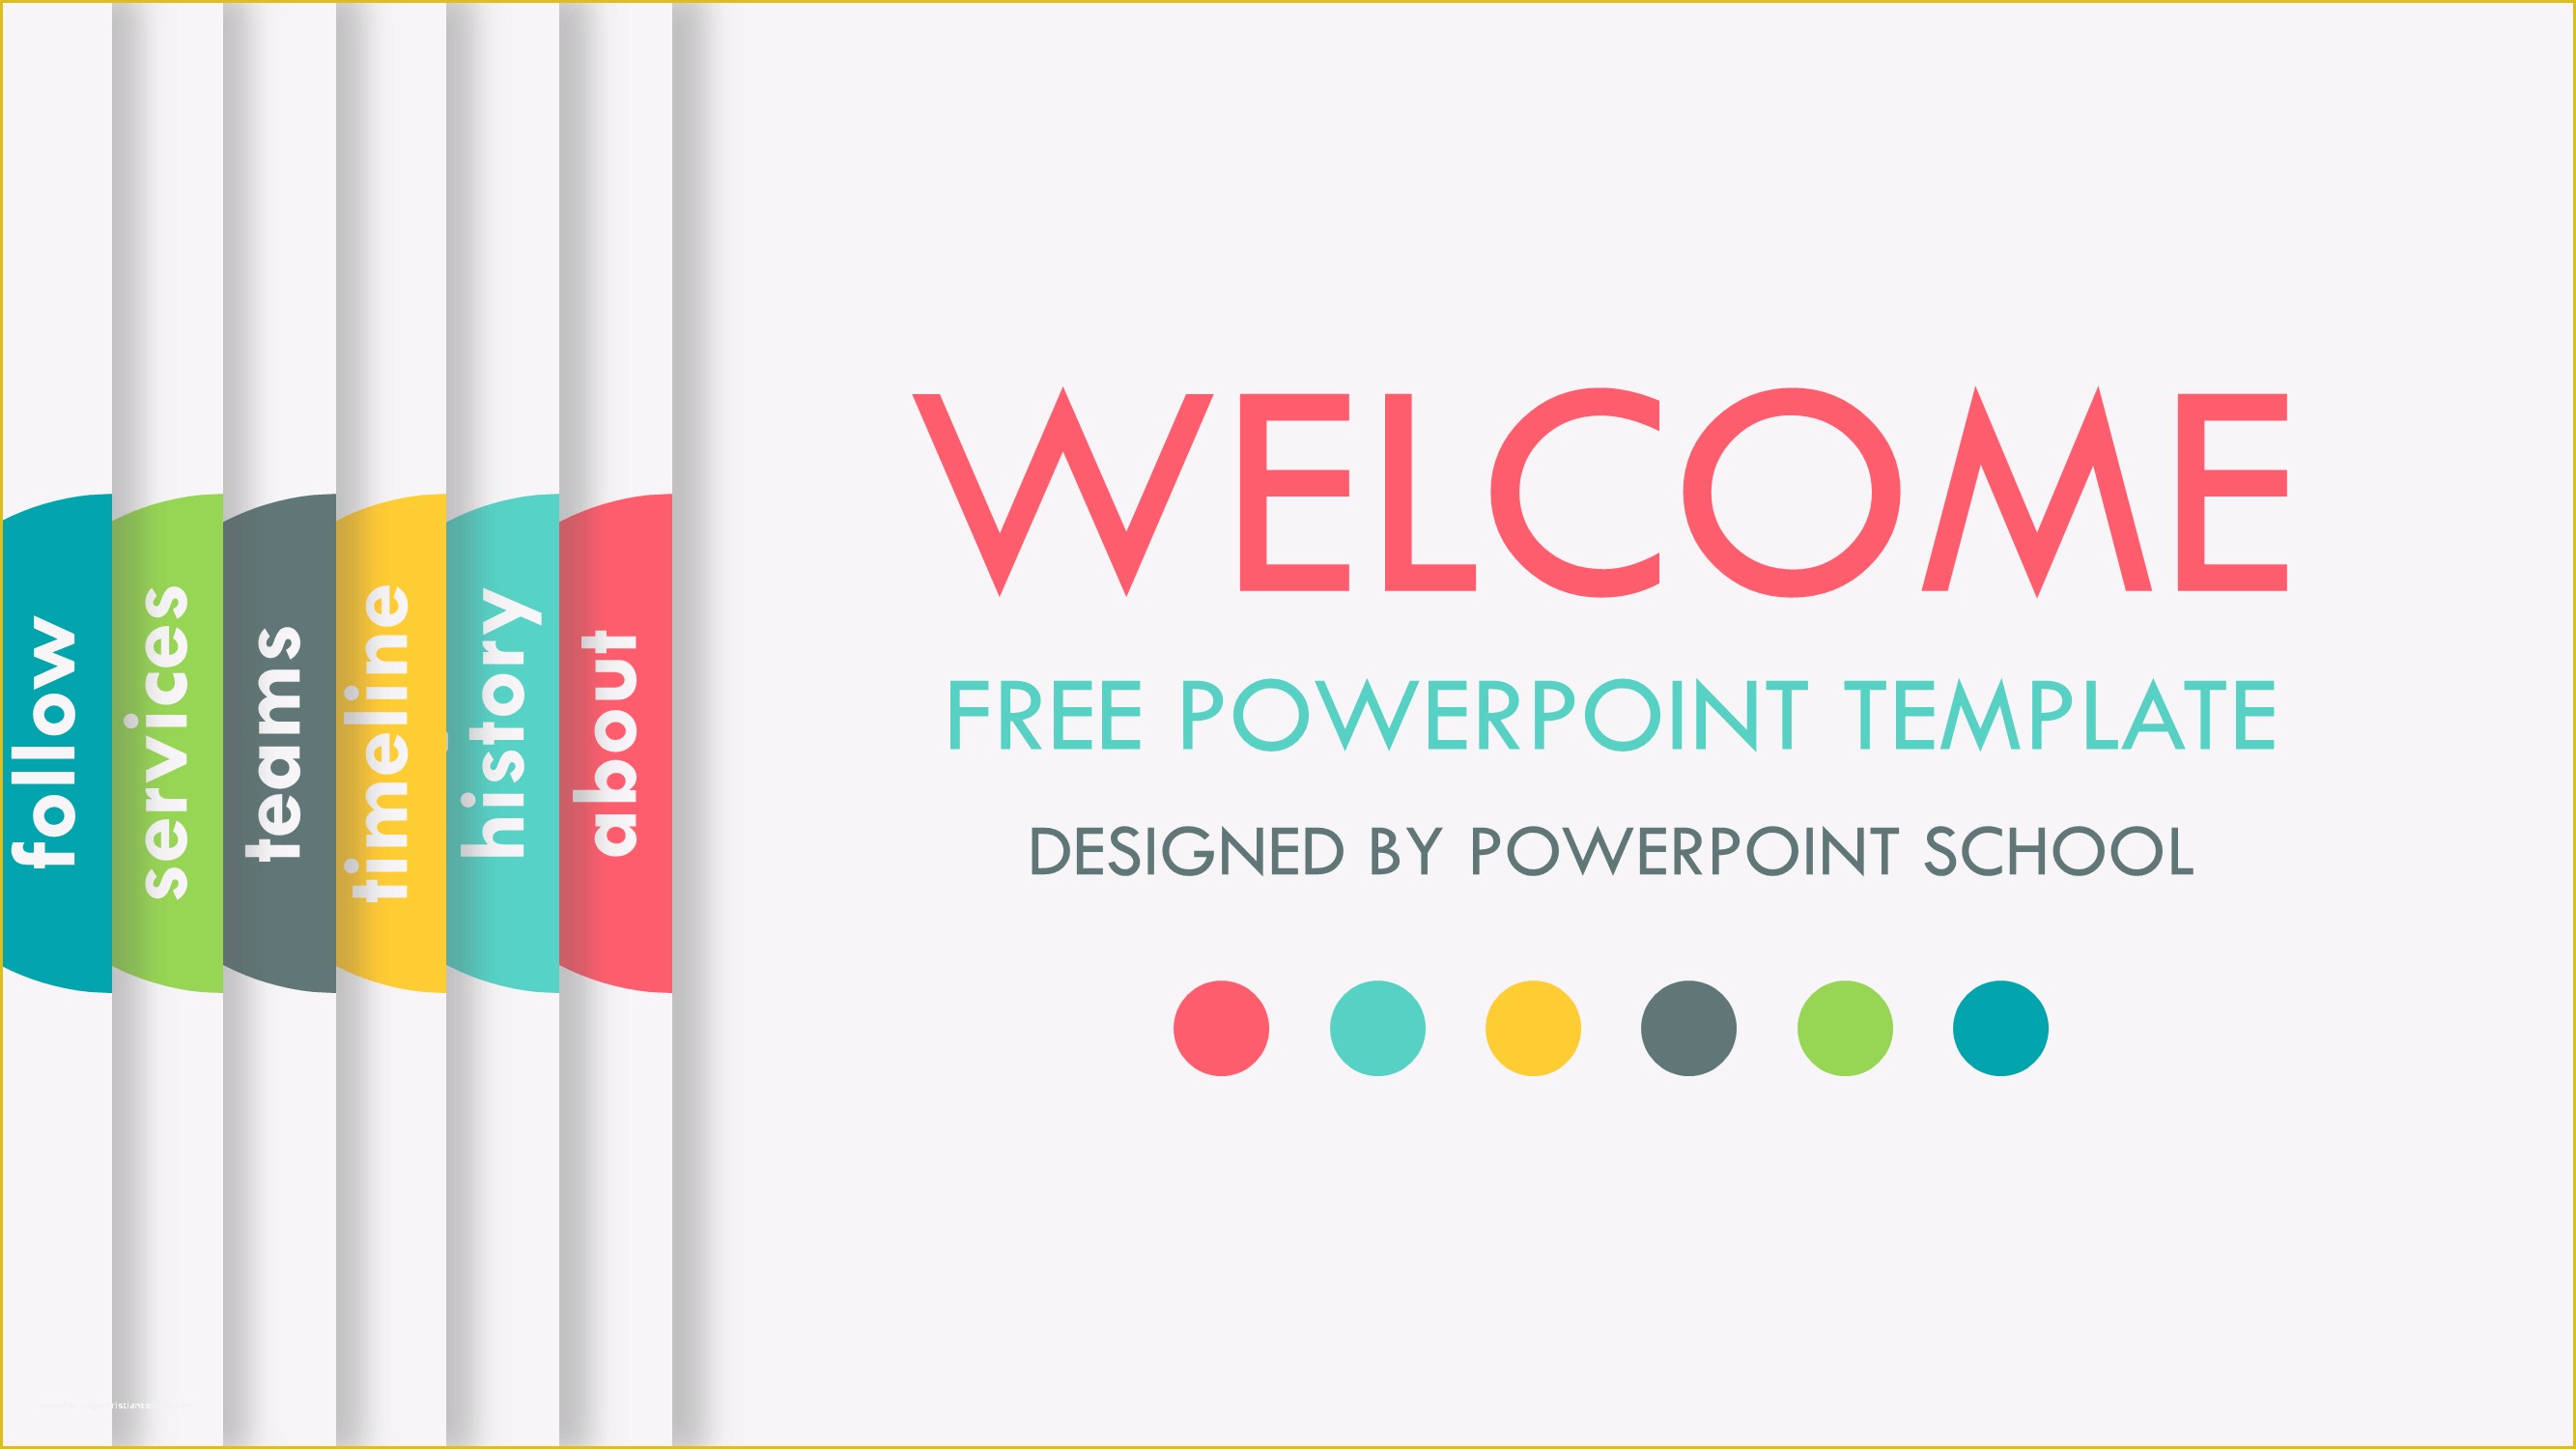 Free Powerpoint Template Design Of Free Animated Powerpoint Presentation Slide Powerpoint